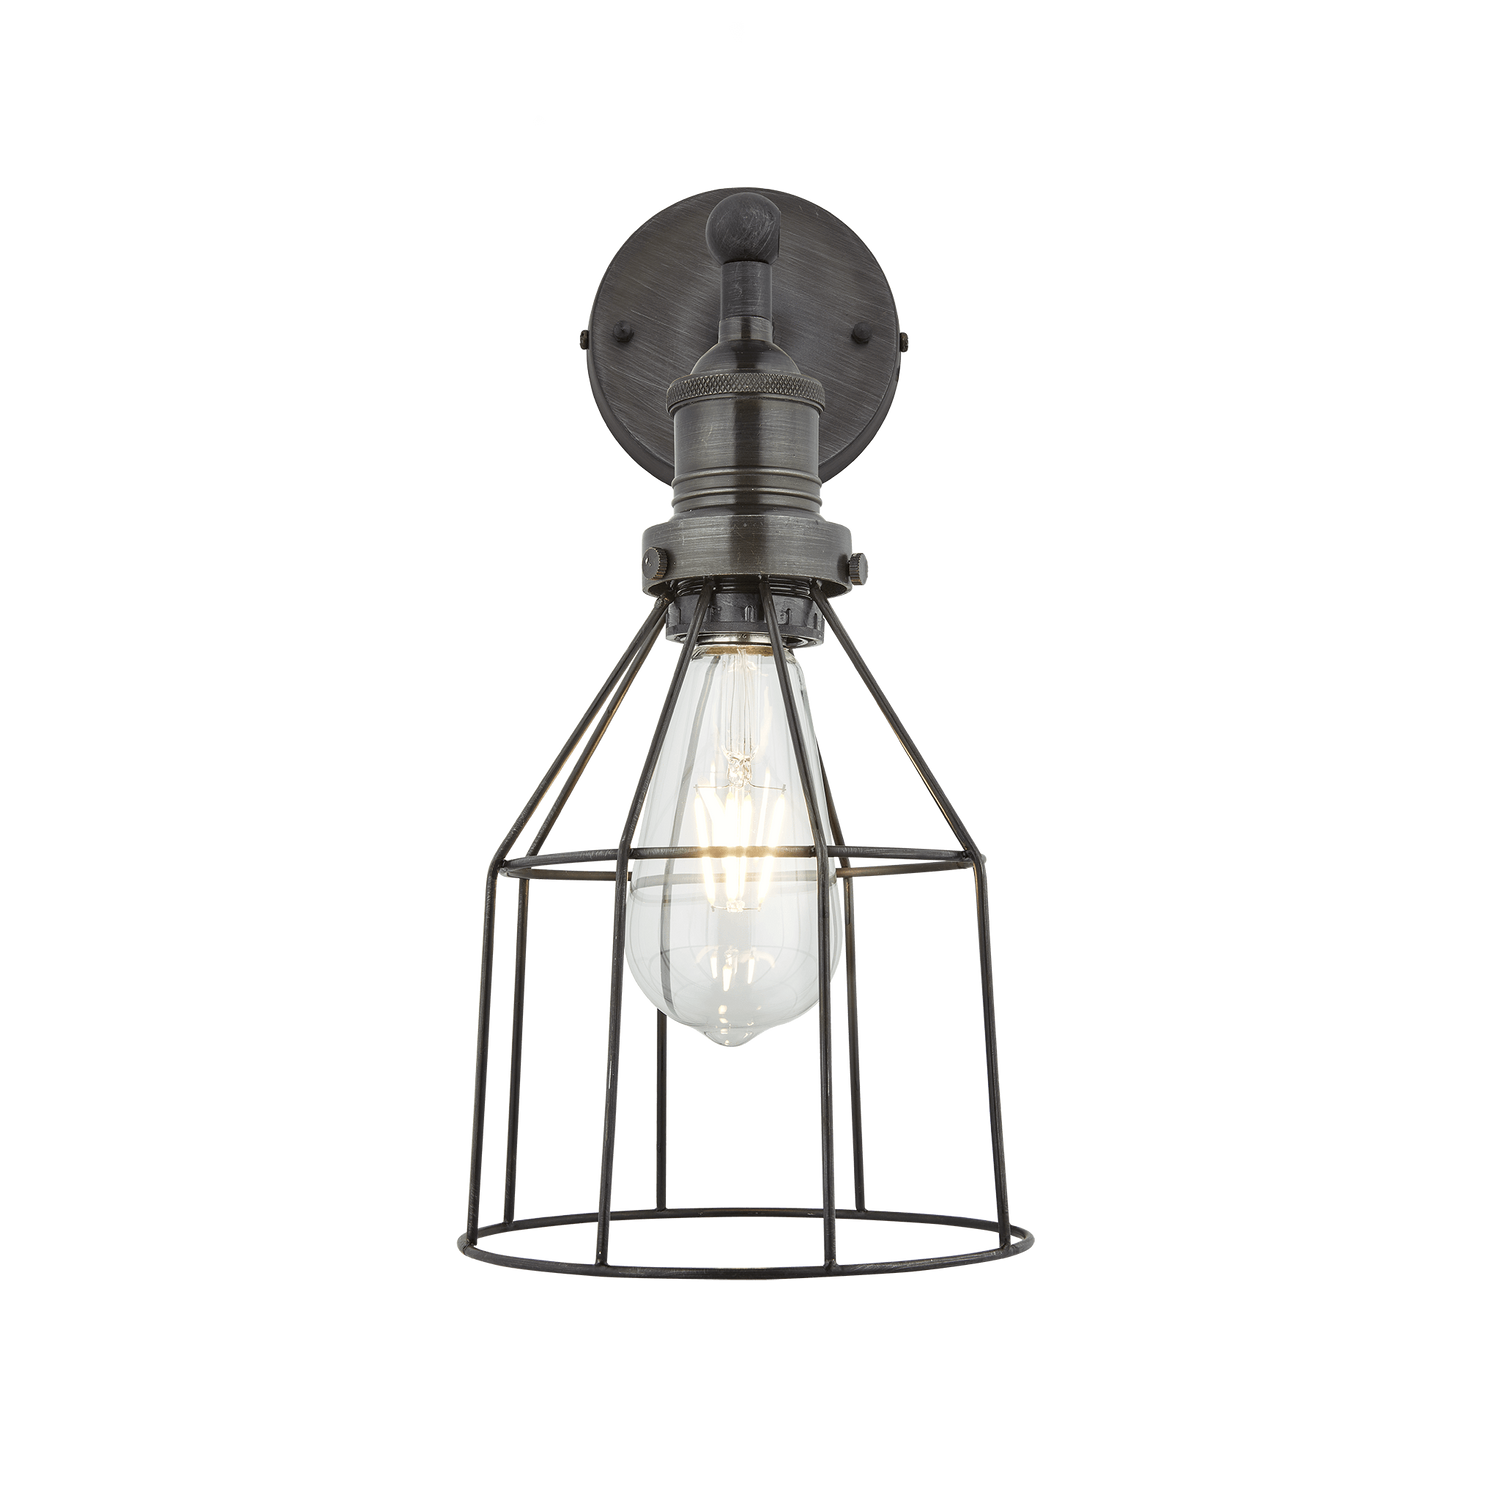  Industville-Industville Brooklyn Wire Cage Wall Light - 6 Inch - Pewter - Cone-Black 93 